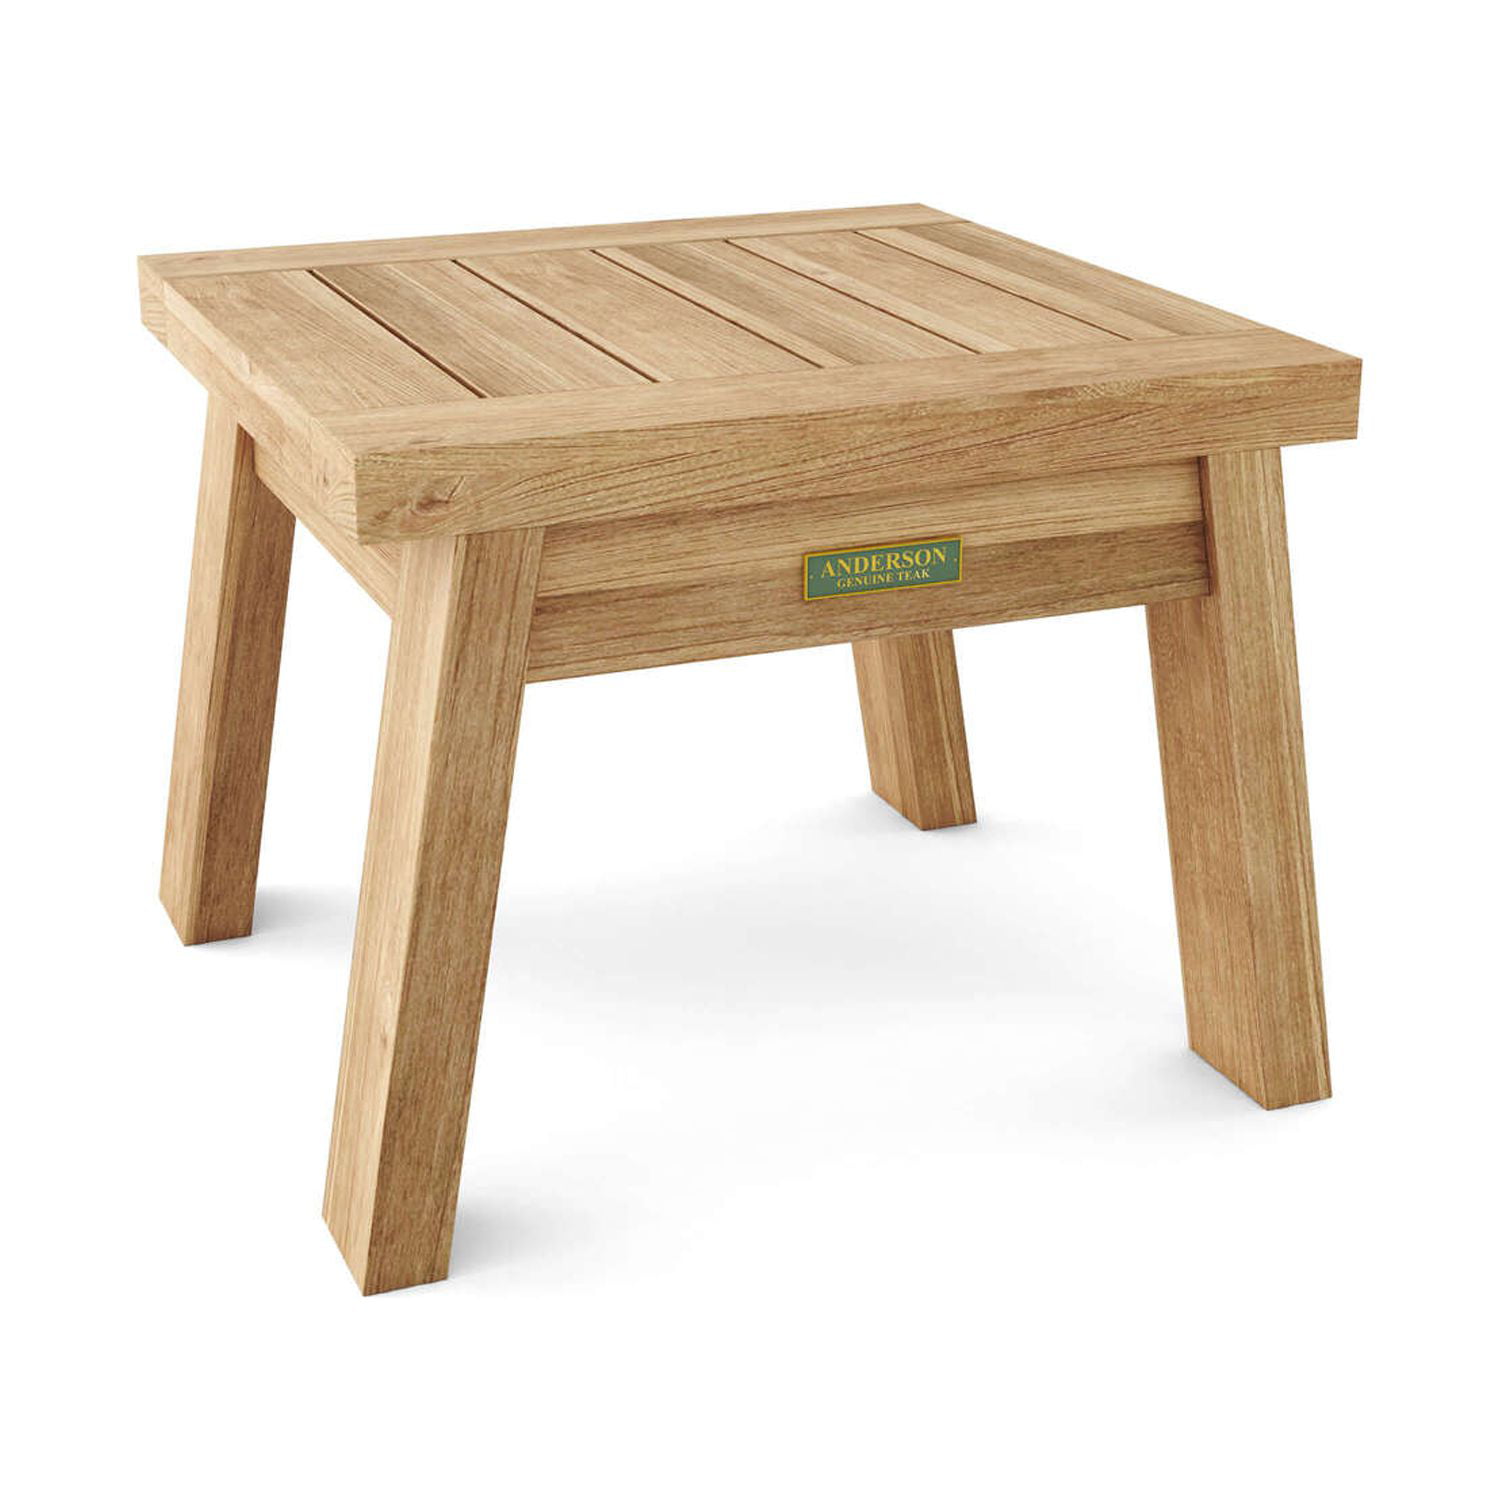 Picture of Anderson Teak DS-326 15.75 x 20.75 x 19.75 in. Palermo Side Table with Natural Smooth Well Sanded